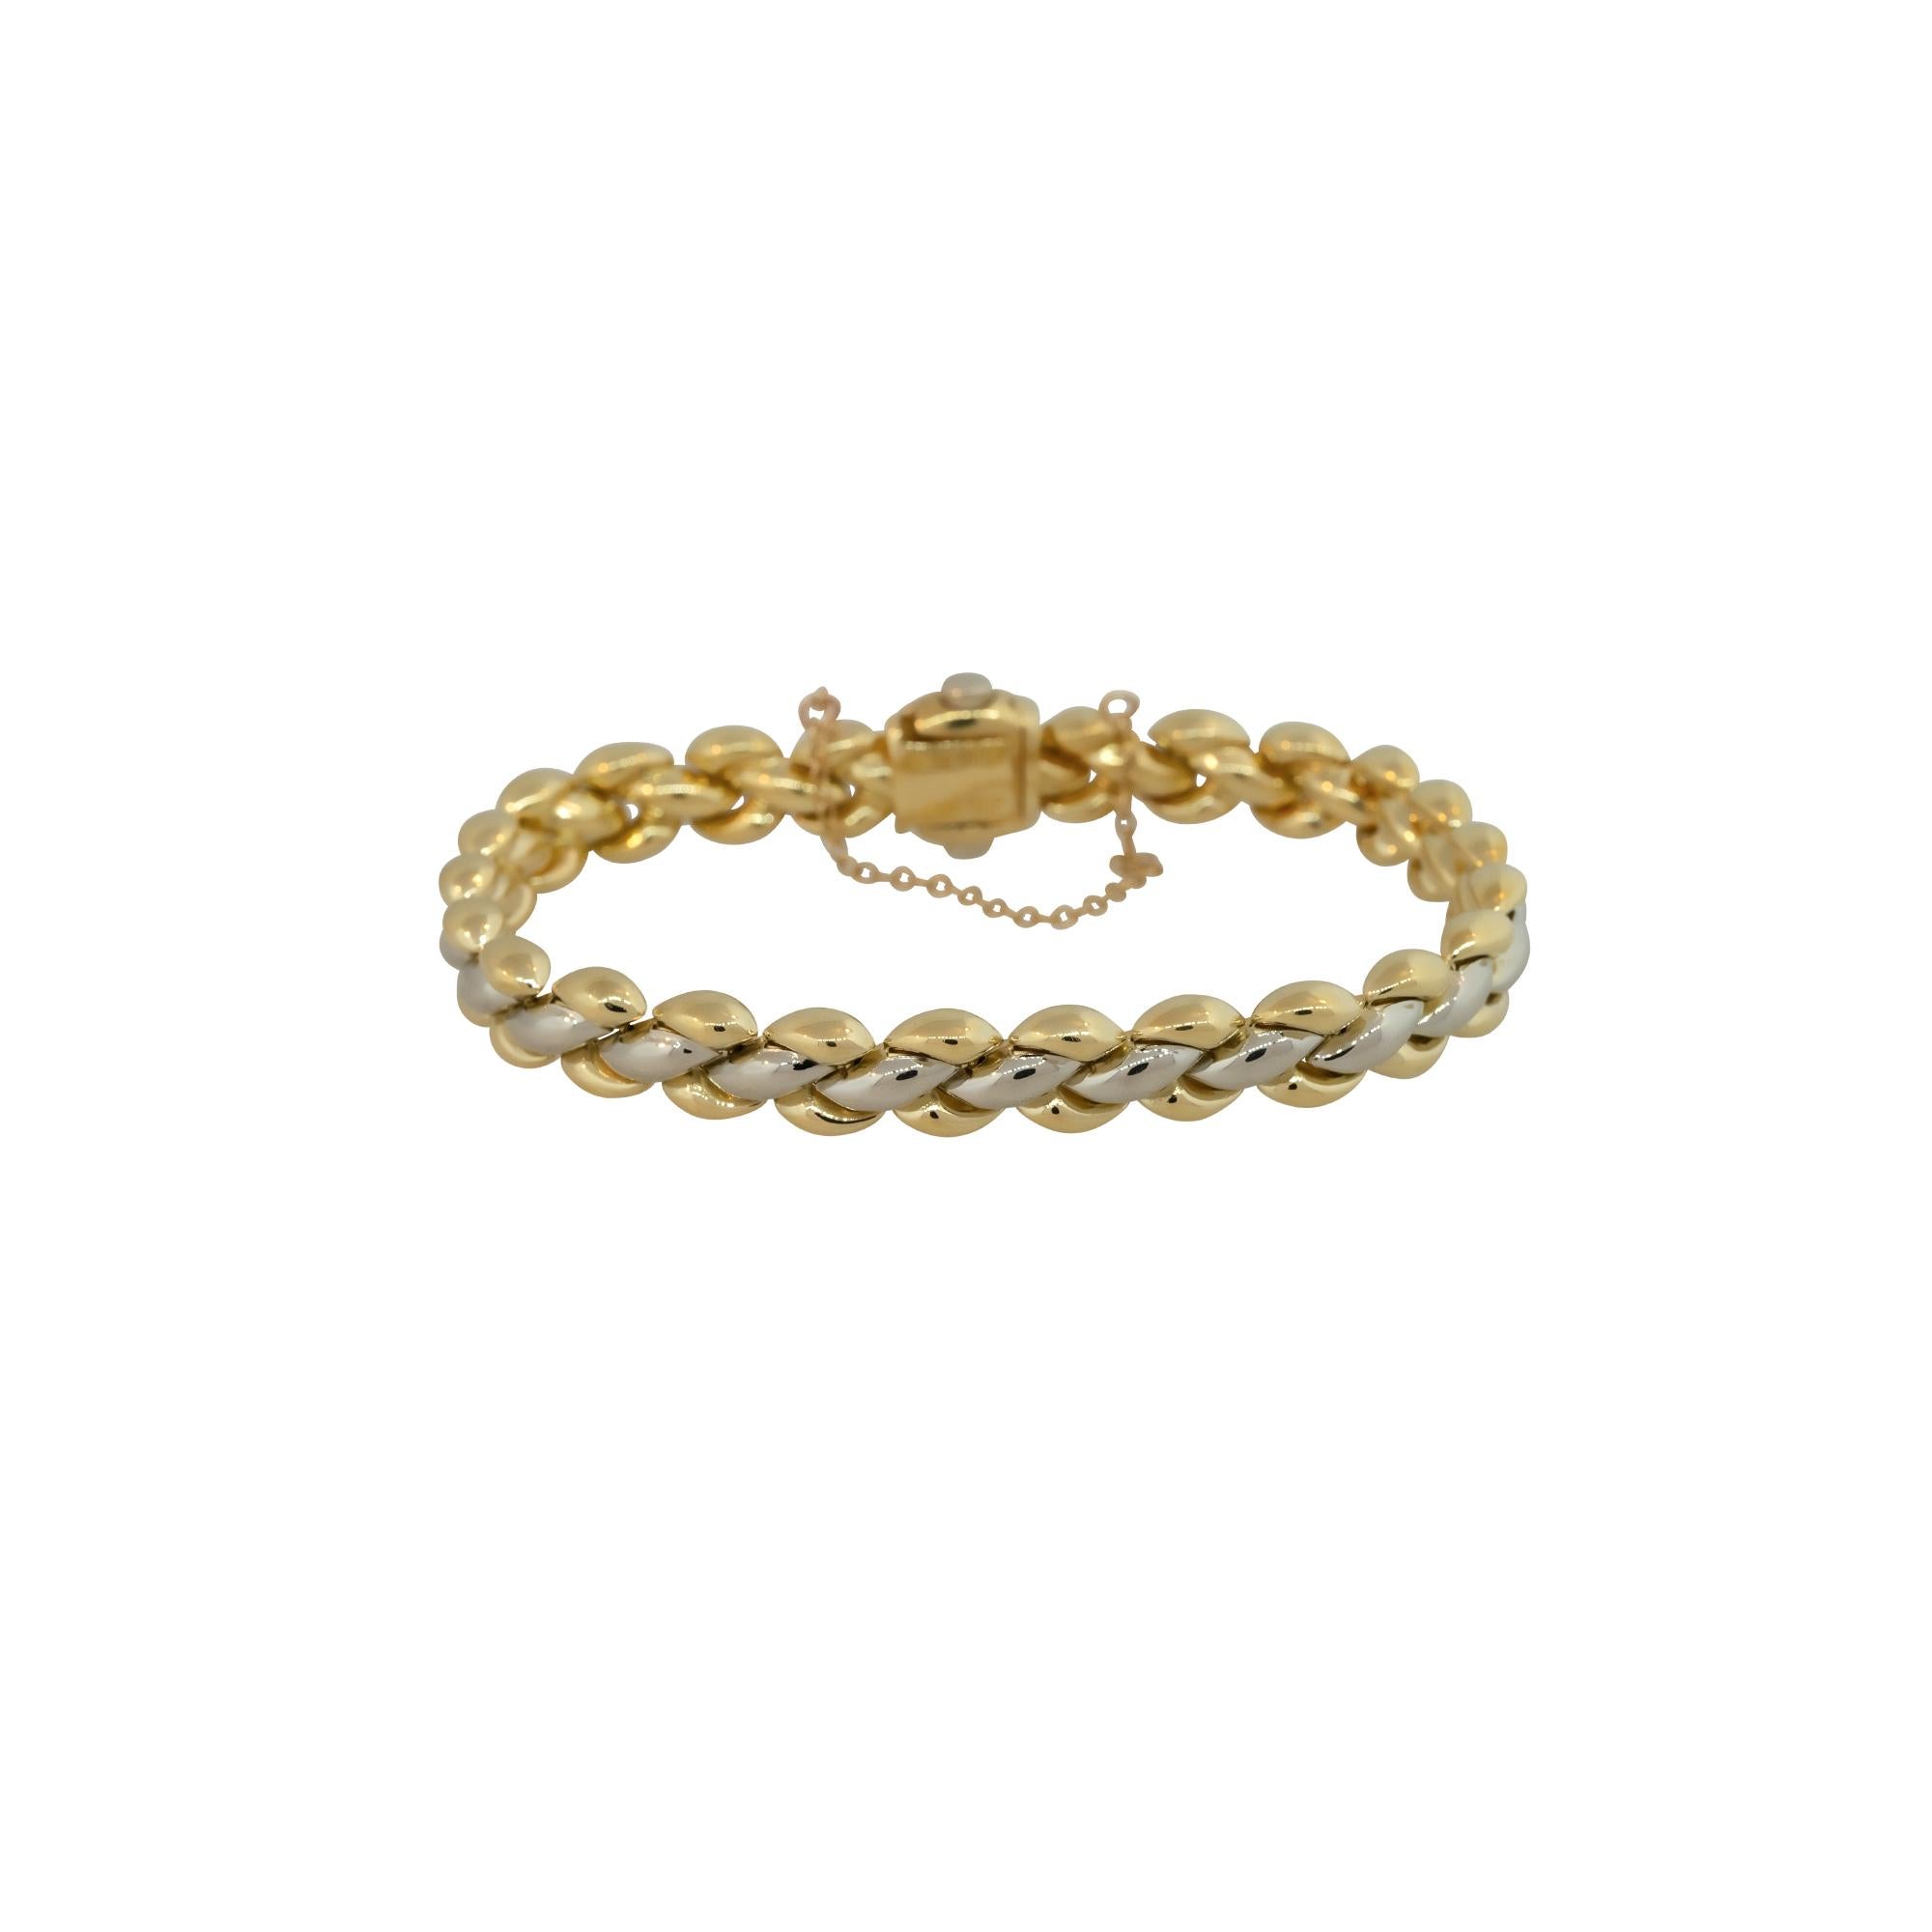 Chimento 18k Two-Tone Yellow and White Gold Reversible Women's Bracelet

Material: 18k White Gold and 18k Yellow Gold
Measurements: Bracelet Measures 7.5″ in Length and 8.5mm in Thickness
Fastening: Tongue in Box Clasp with Safety Chain
Item Weight: